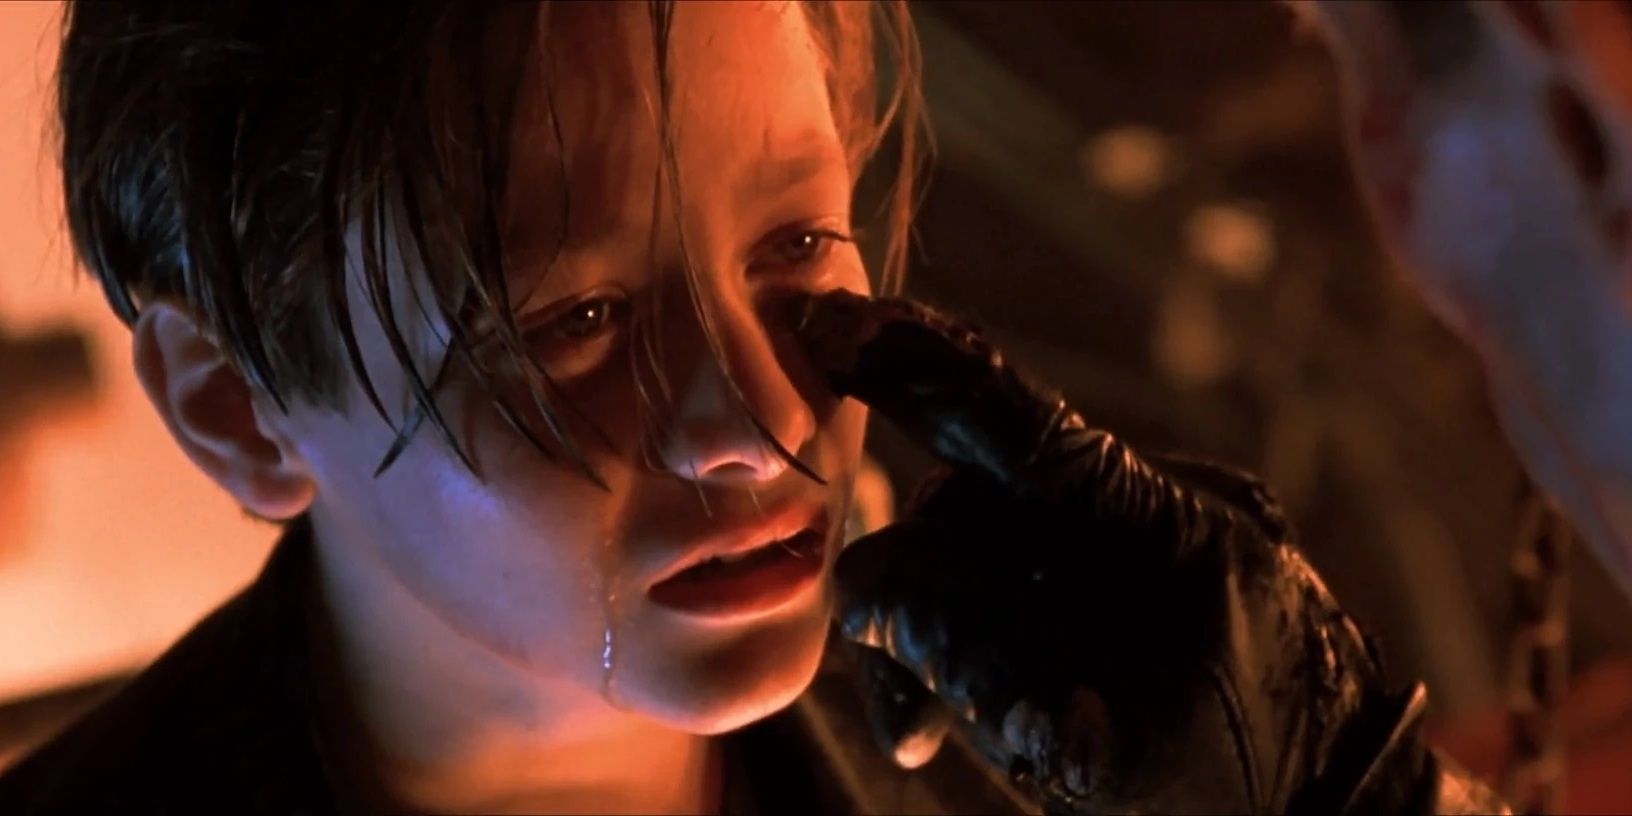 The T-800 says goodbye to John Connor at the end of Terminator 2